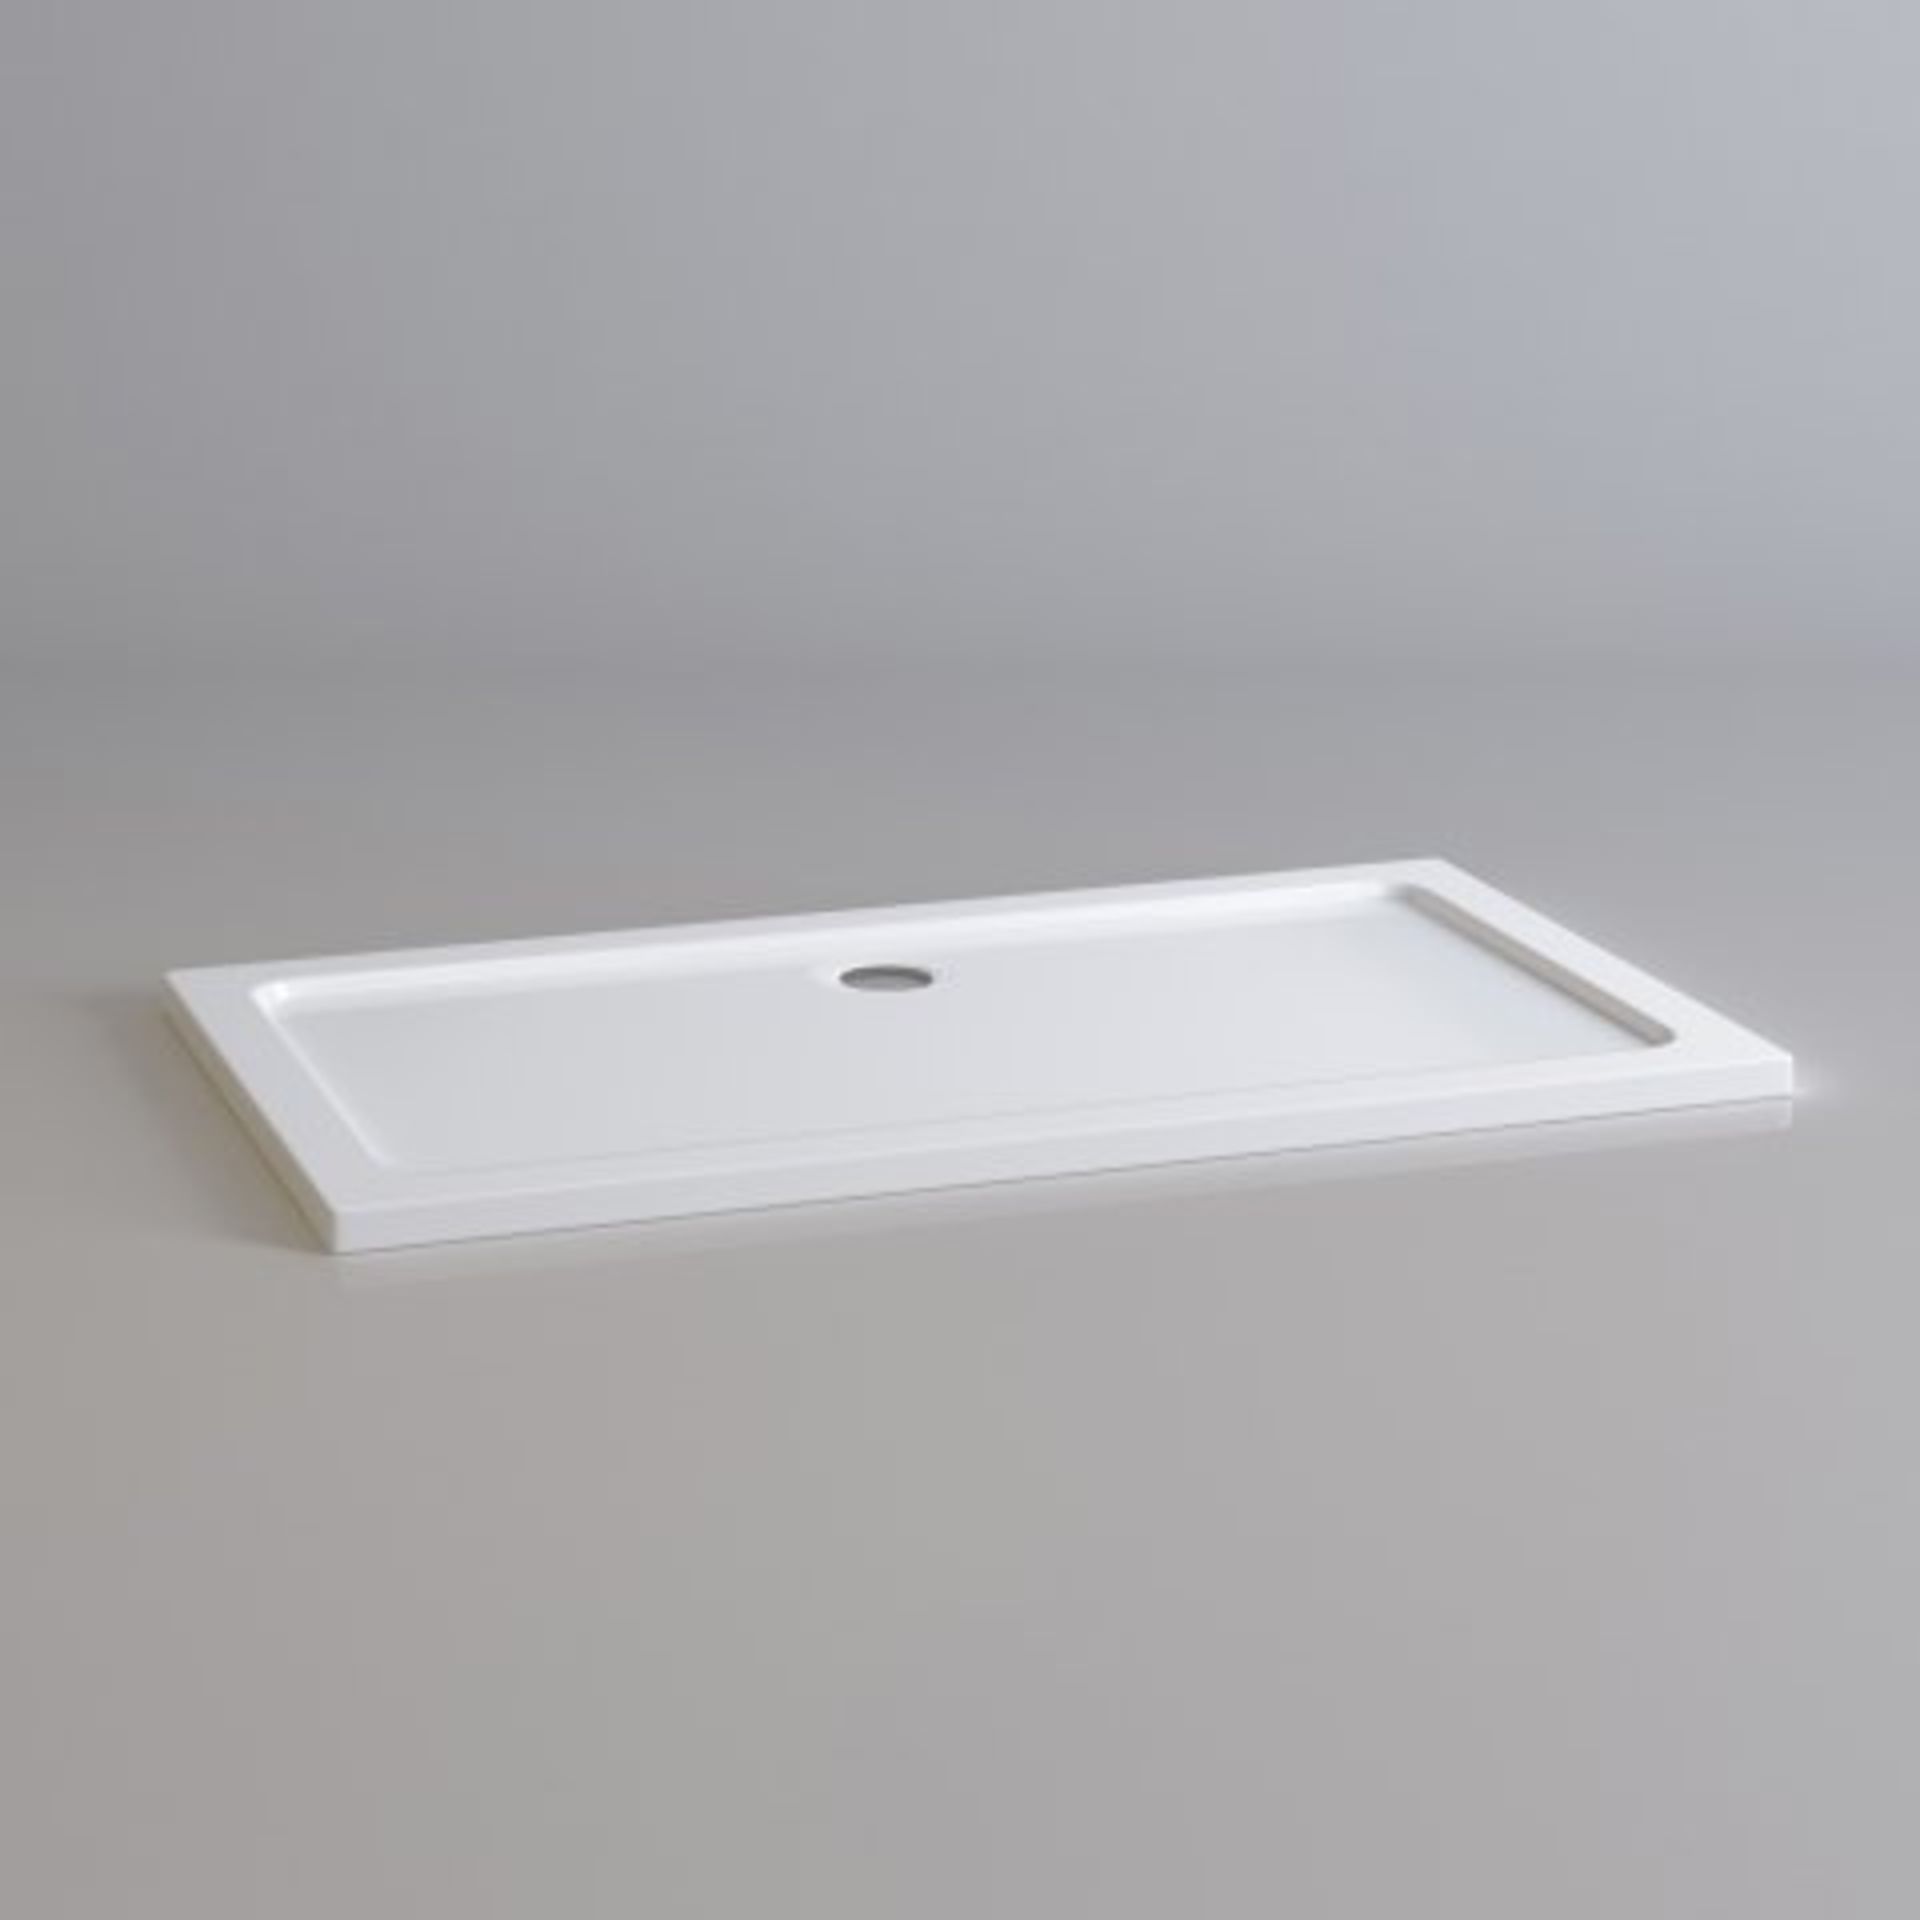 (T48) 1400x800mm Rectangular Ultraslim Stone Shower Tray. RRP £424.99. Magnificently built, this